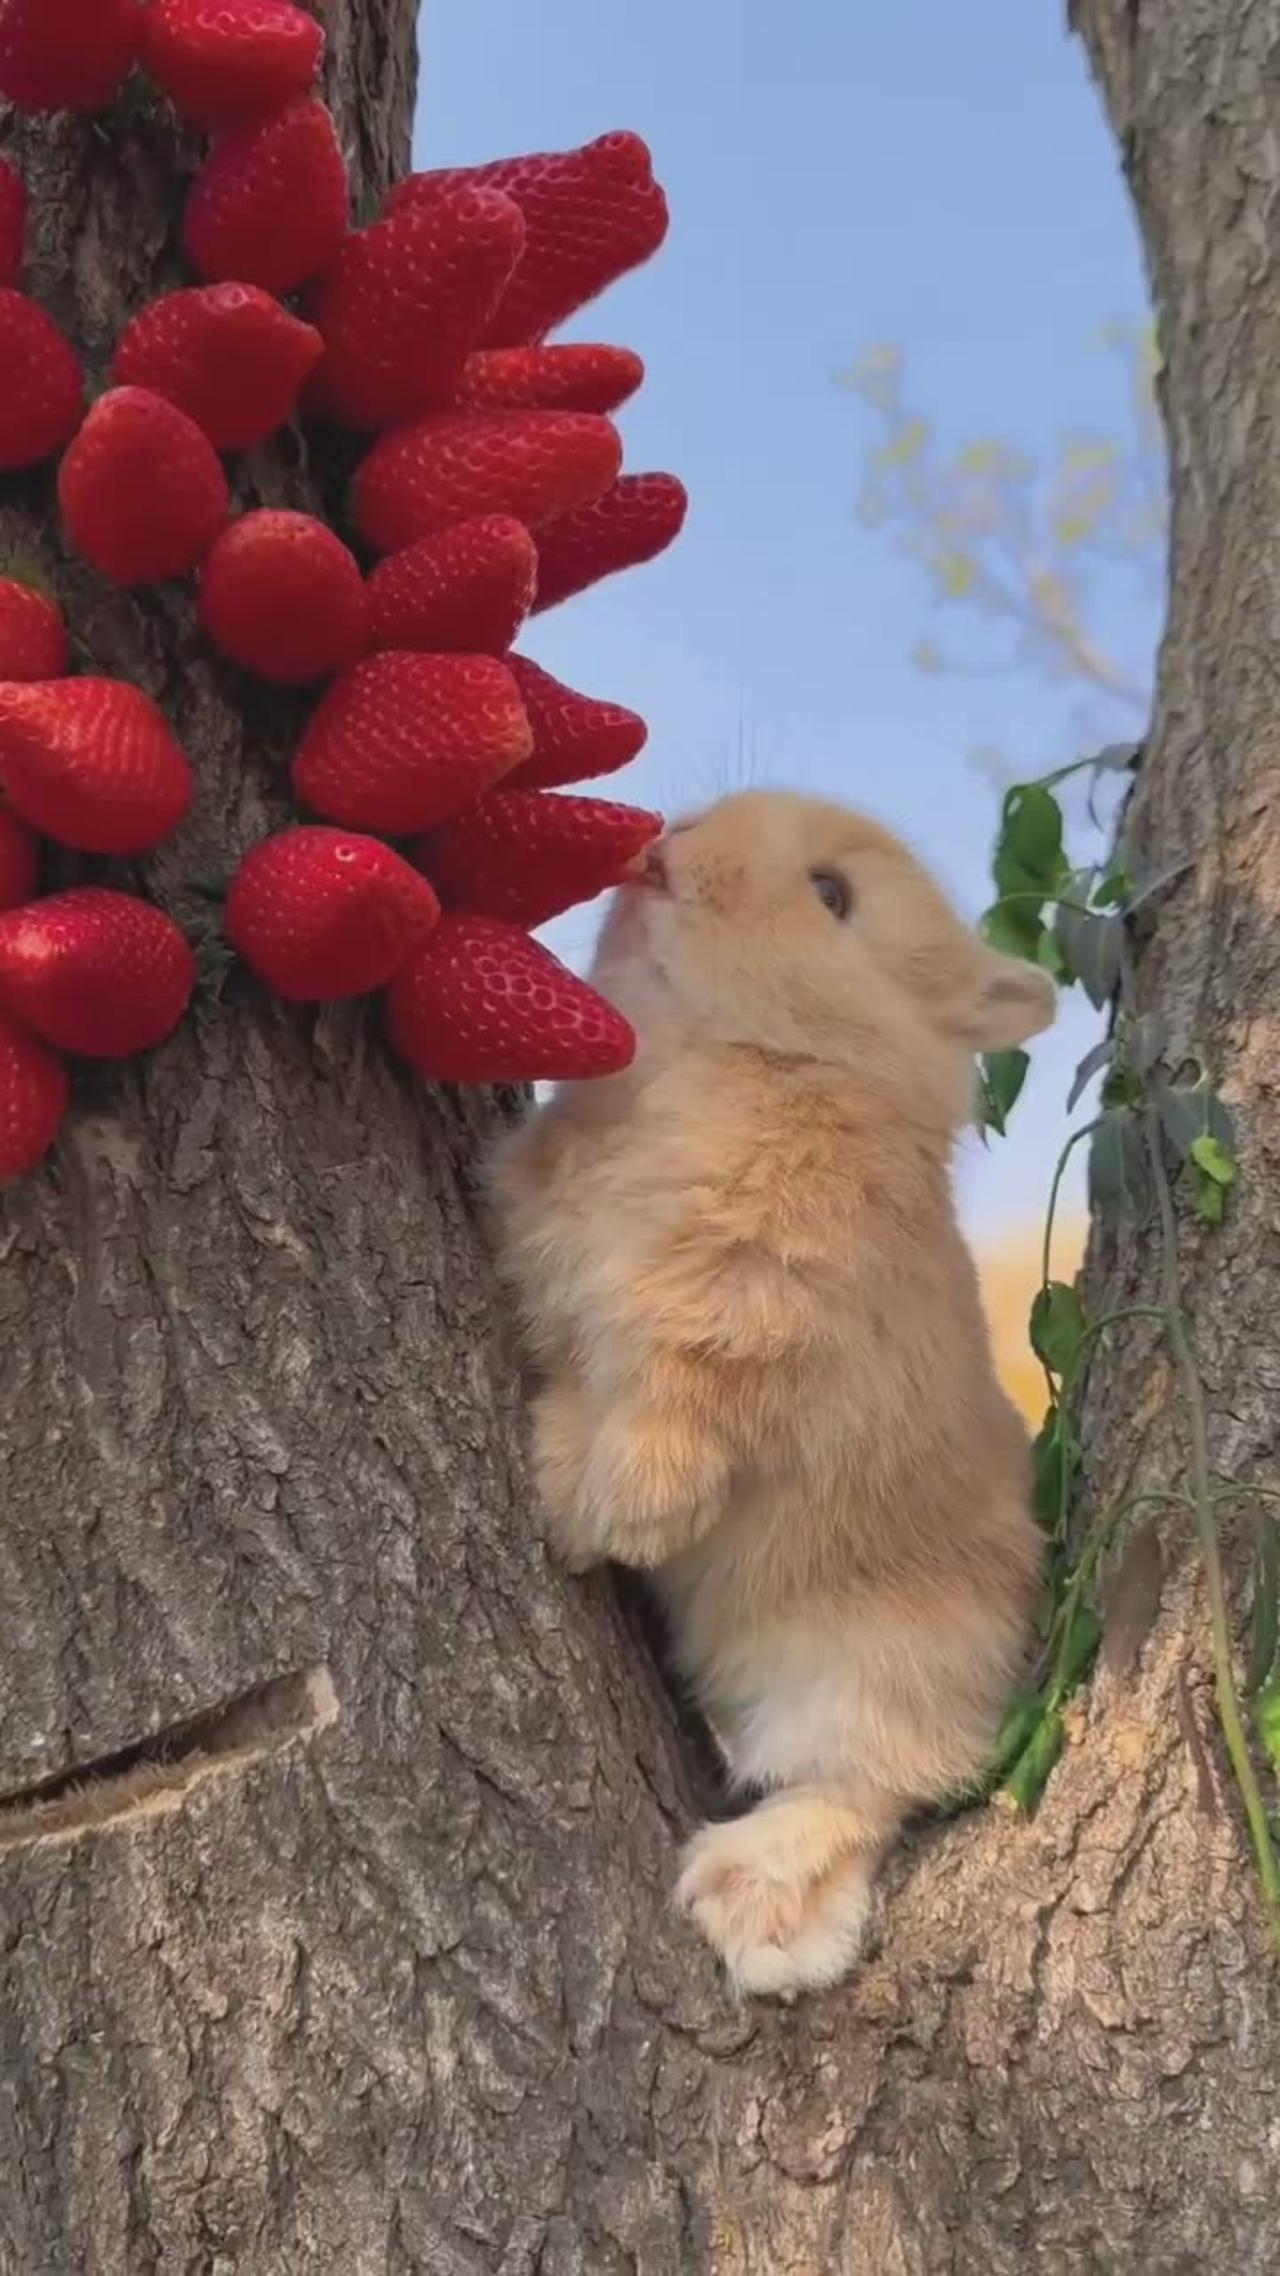 Eating strawberry is so satisfying!🐇